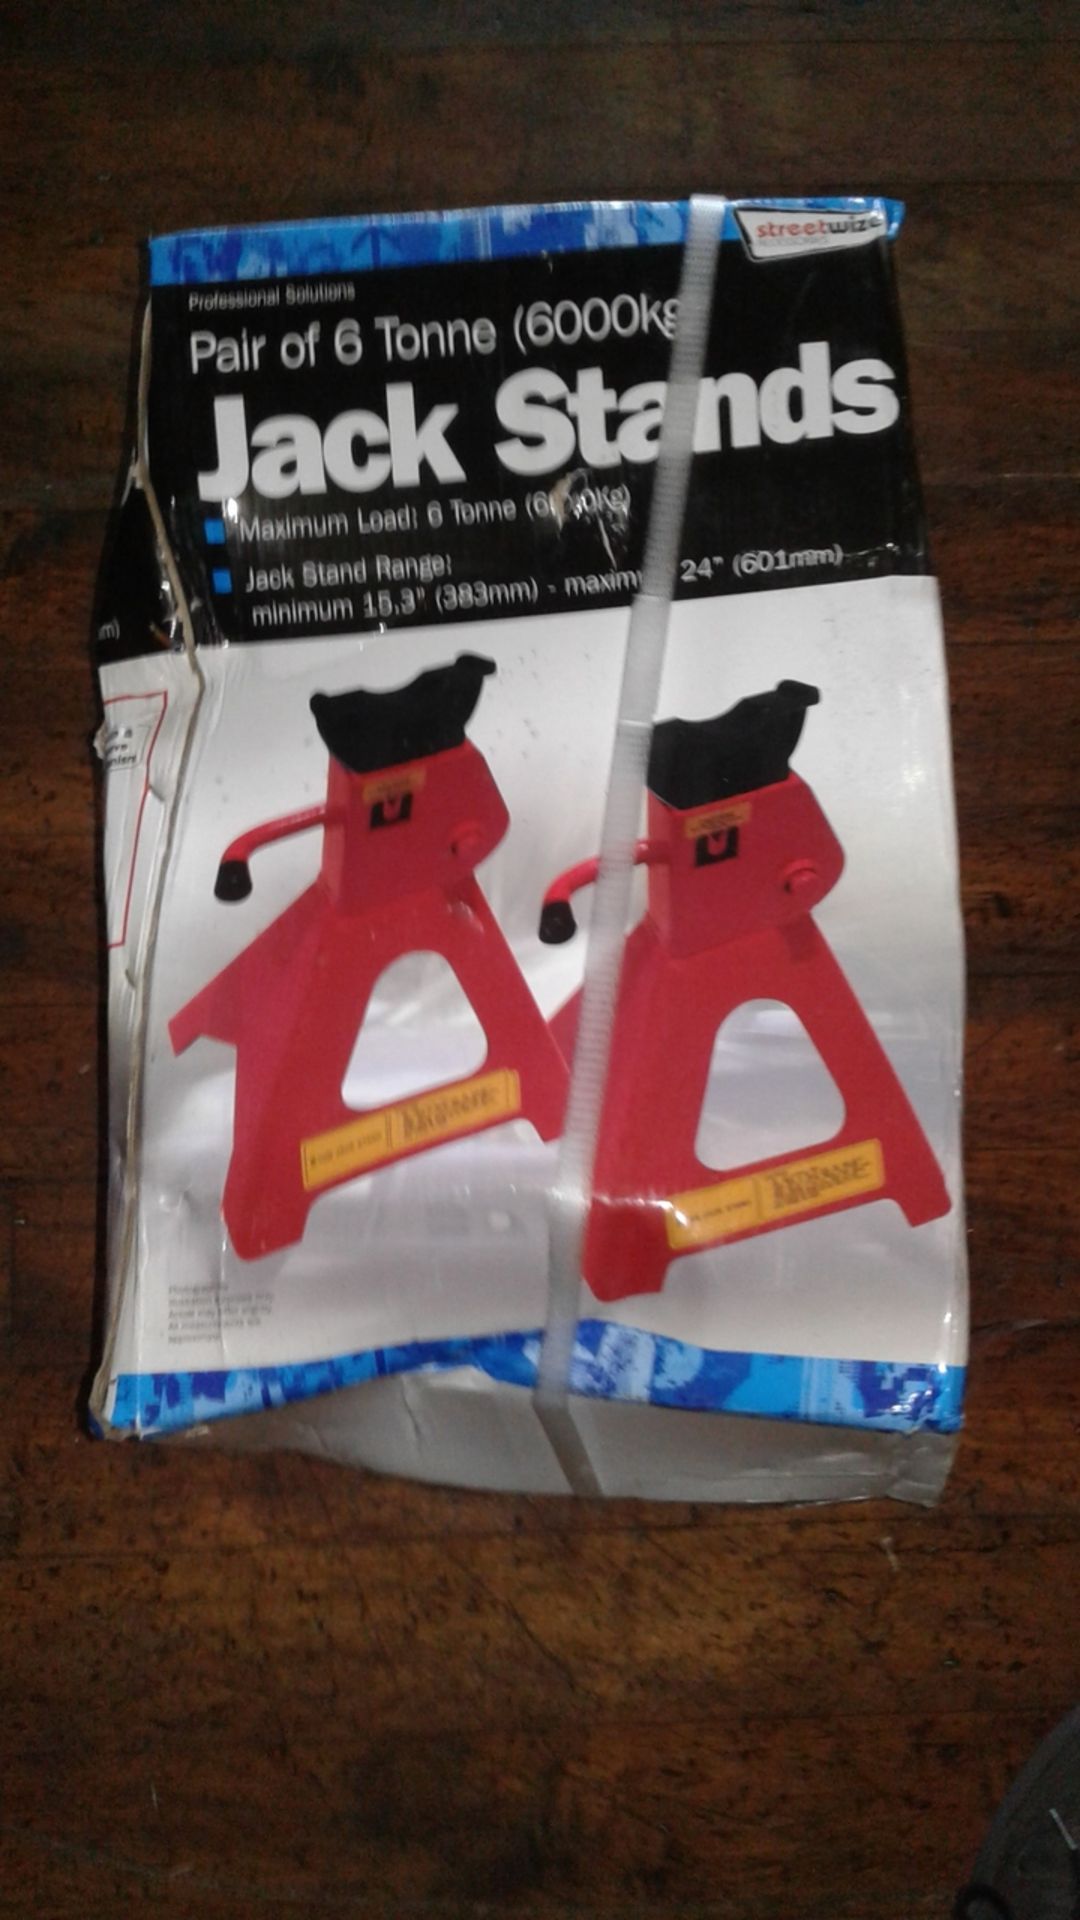 Pair of 6 tonne Axle jack stands - new unused heavy duty - damage box - items brand new rrp £49.99 a - Image 2 of 2